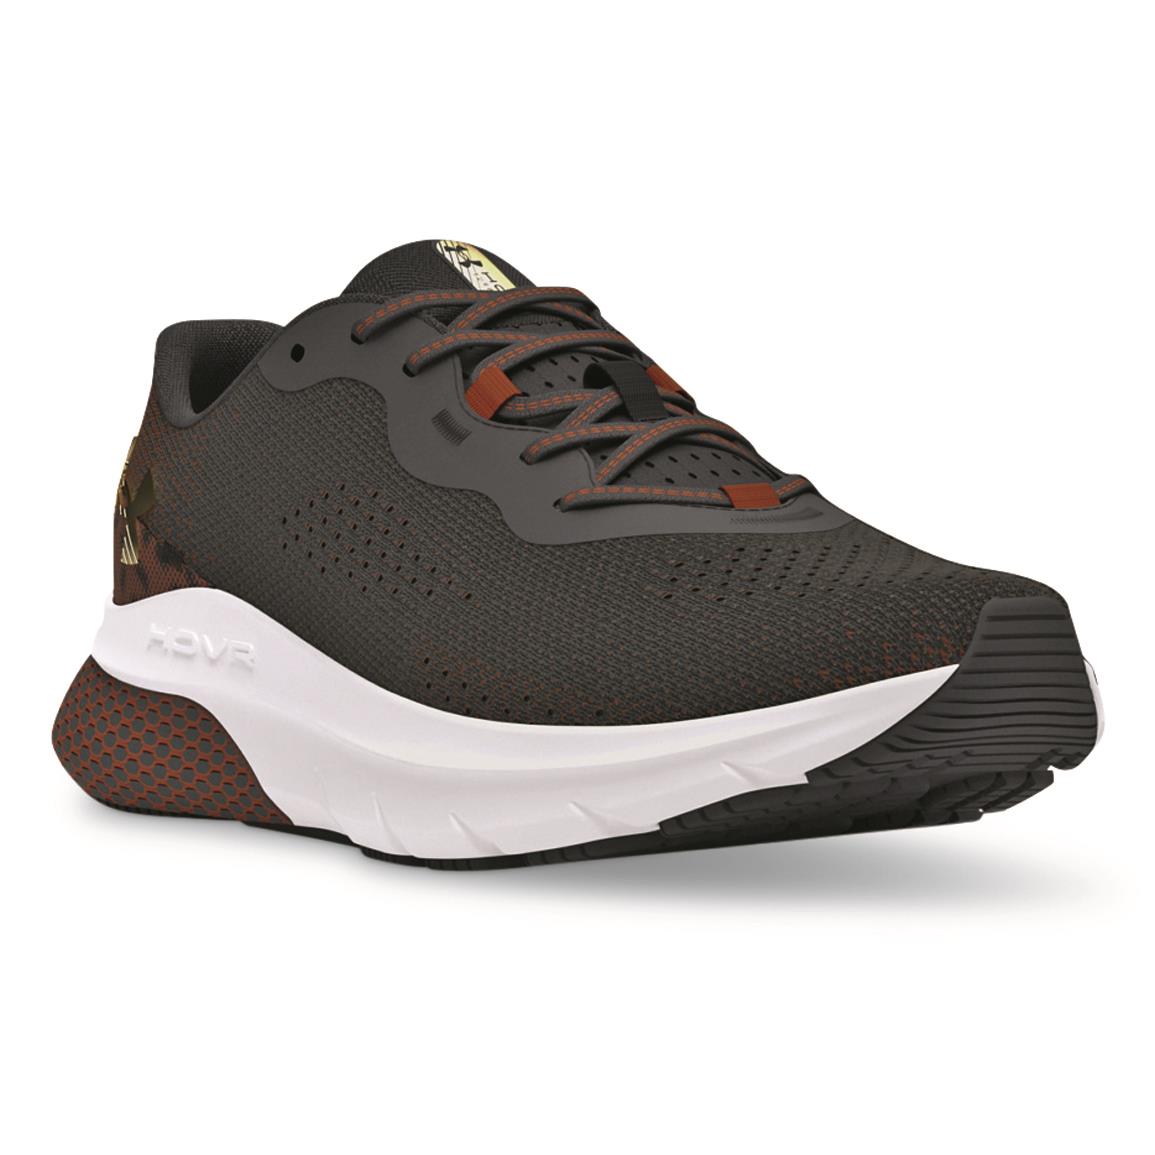 Under Armour Women's HOVR Turbulence 2 Printed Running Shoes, Black/tawny Brown/metallic Gold